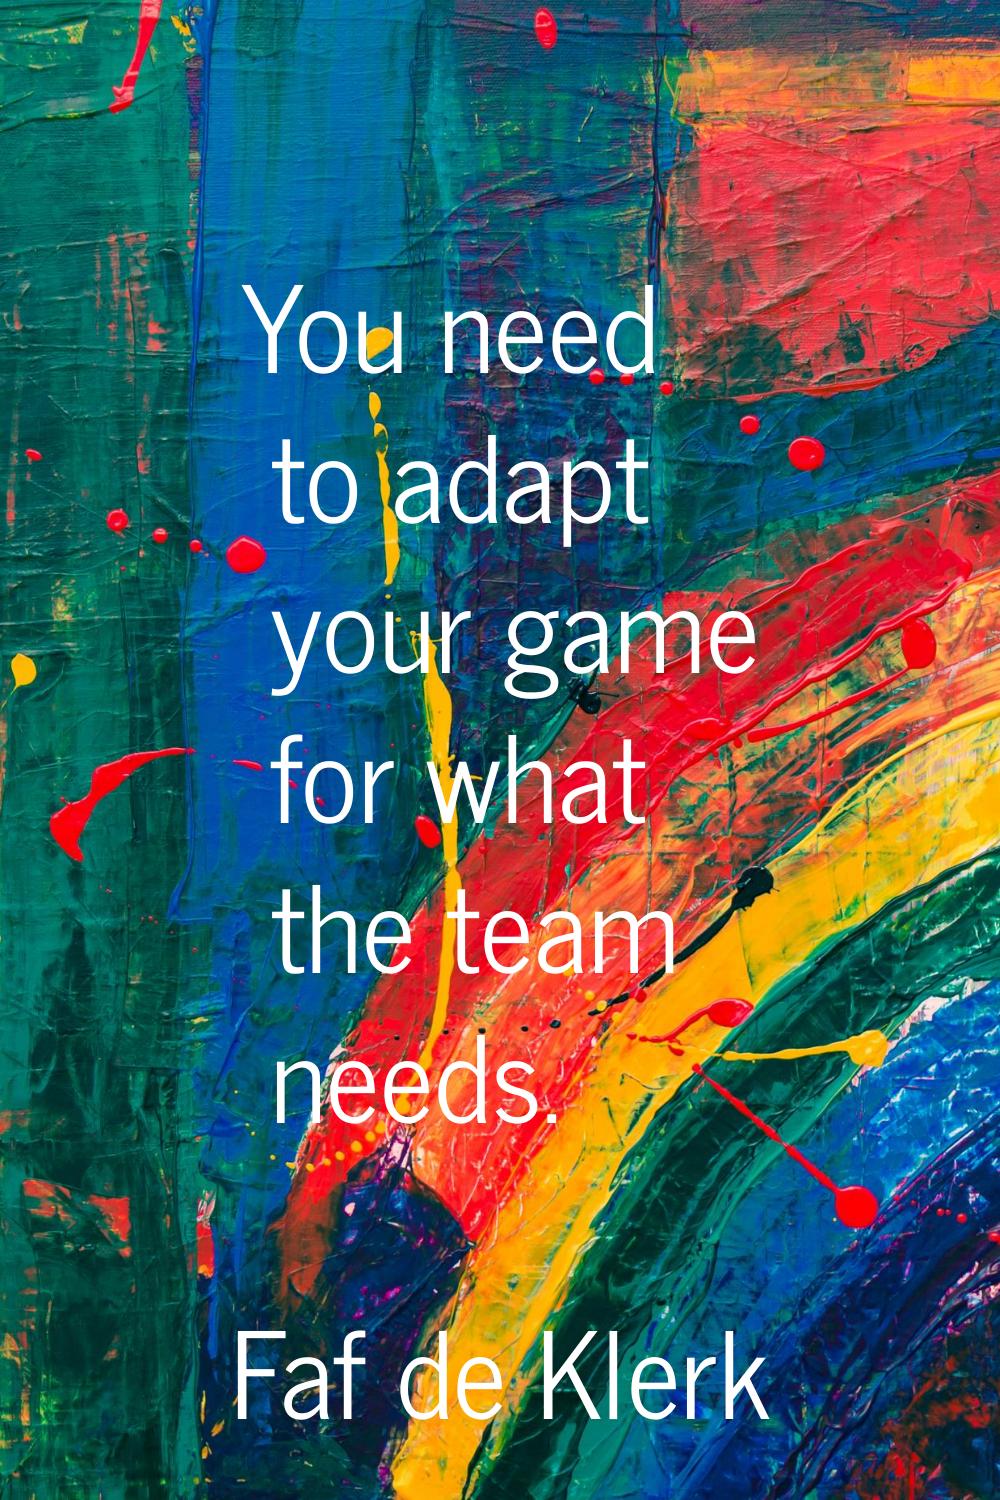 You need to adapt your game for what the team needs.